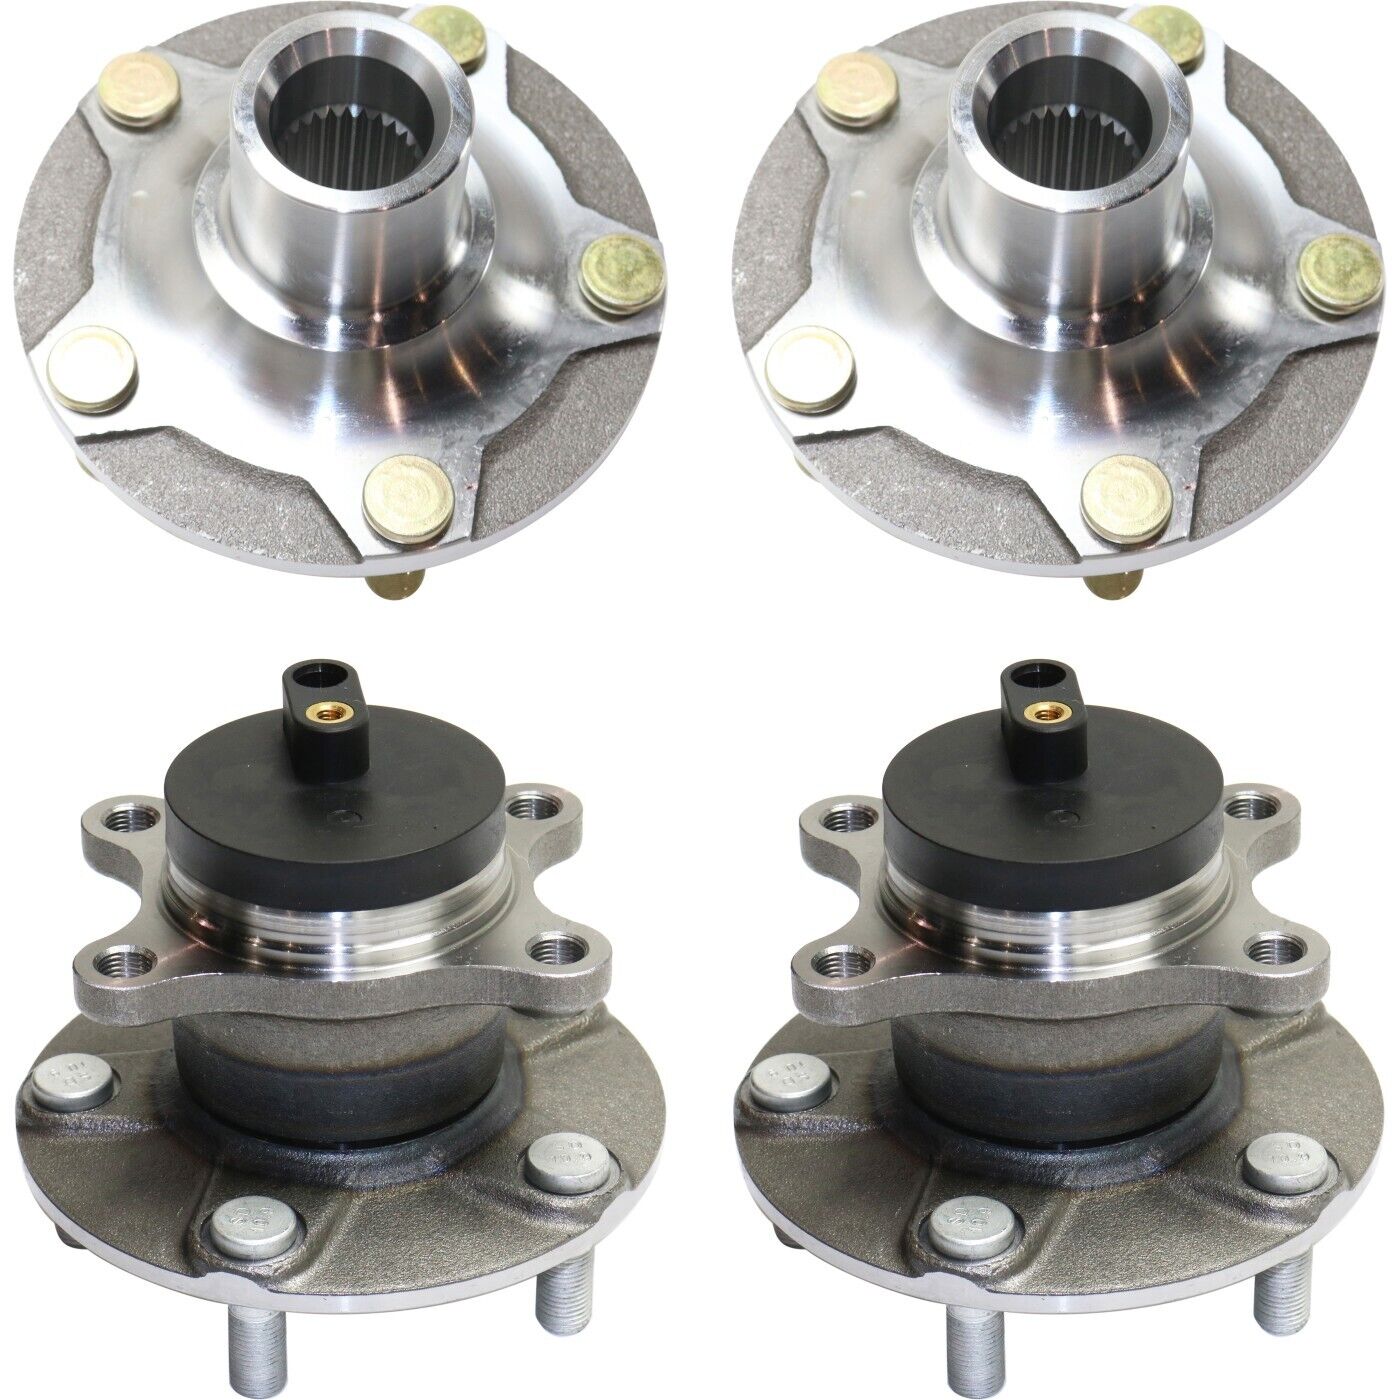 Set of 4 Wheel Hubs Front & Rear Driver Passenger Side Left Right for Suzuki SX4